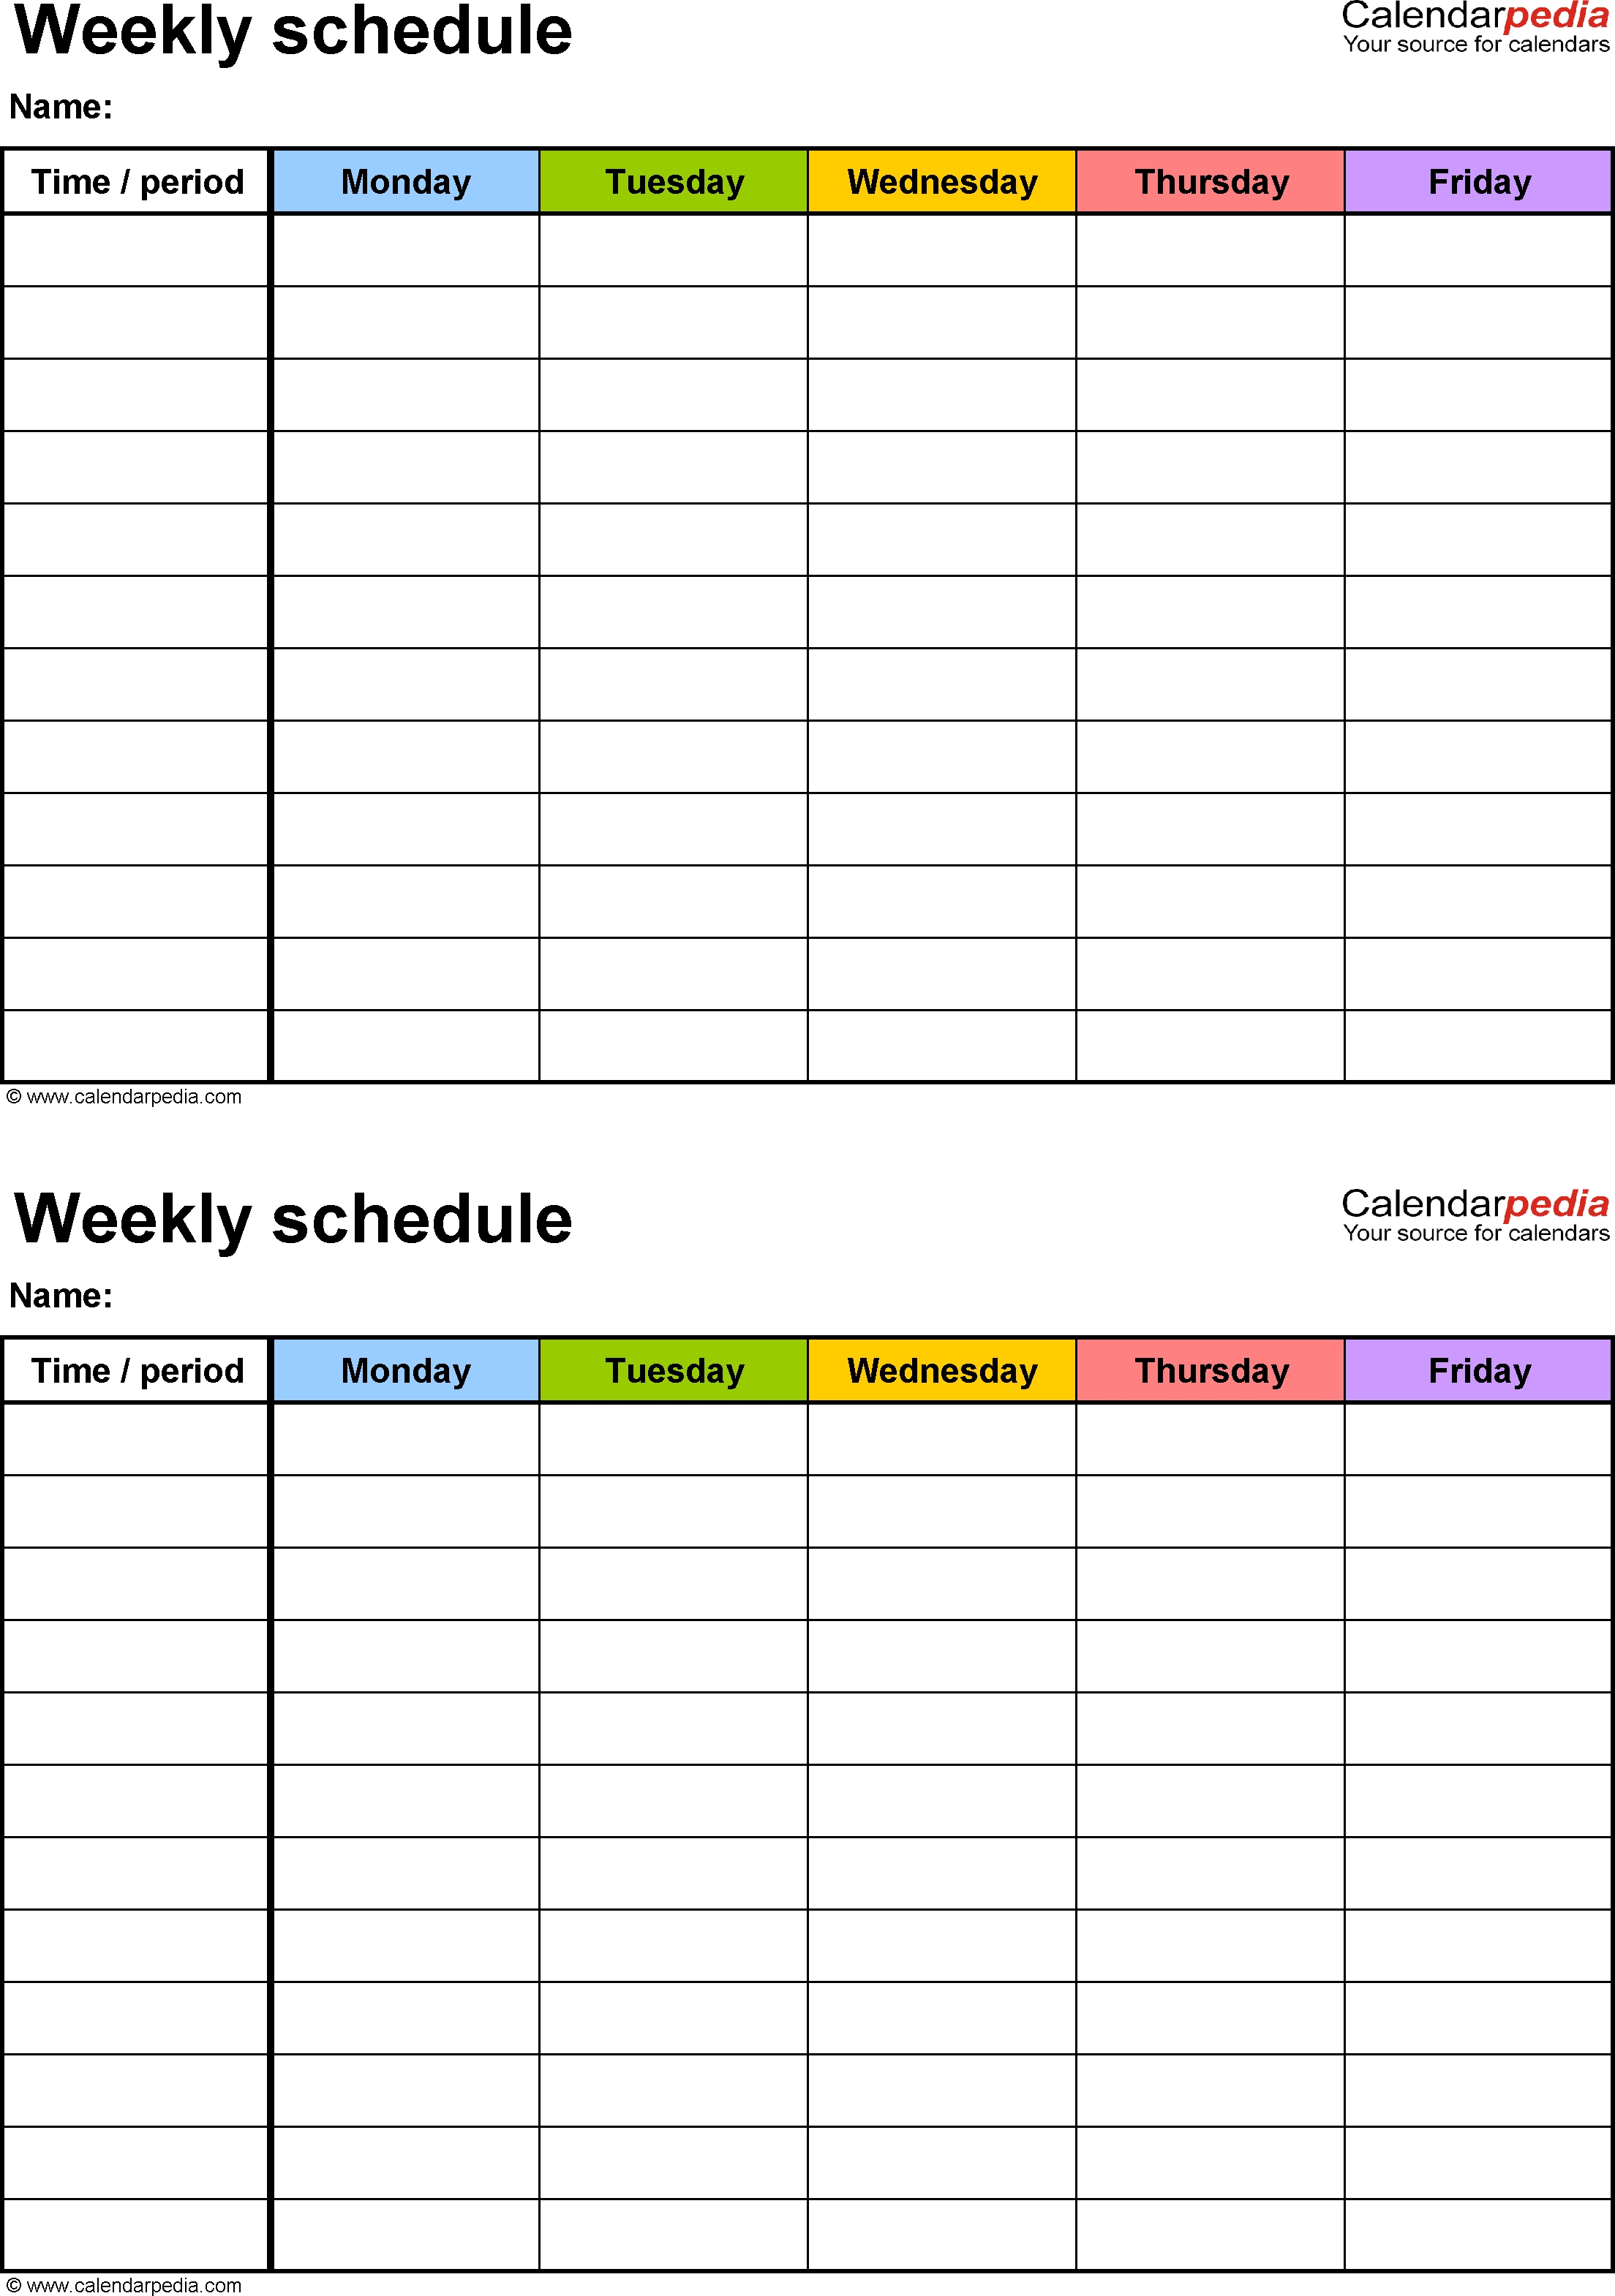 Free Weekly Schedule Templates For Pdf - 18 Templates 2 Week Calendar Template Pdf